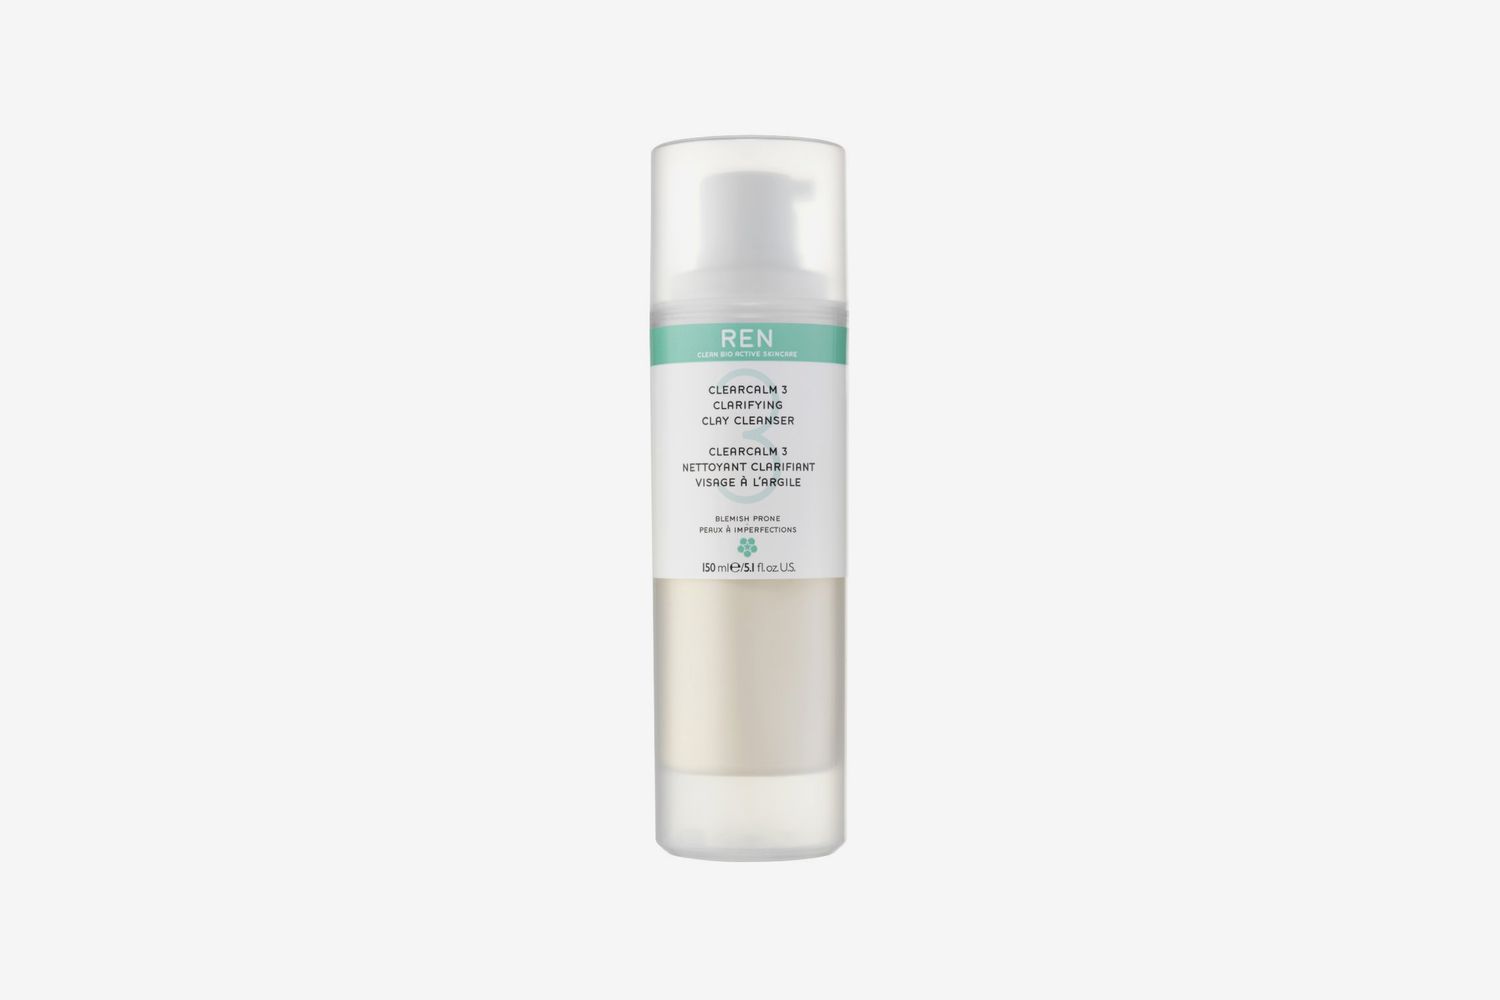 Clearcalm Clay Cleanser